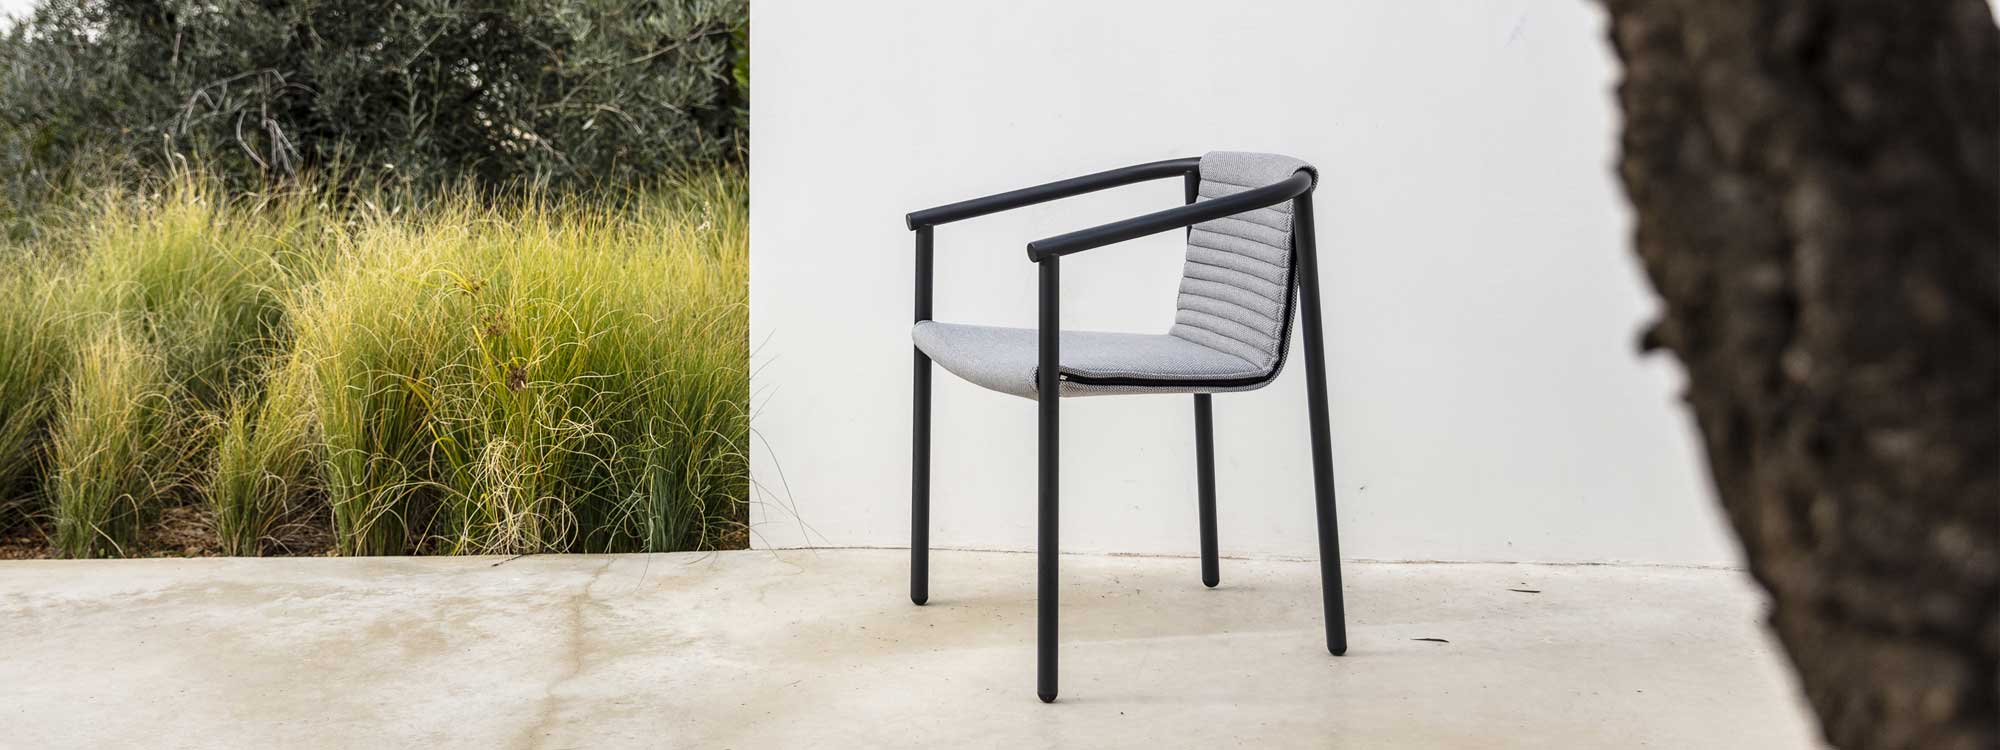 Duct Round outdoor dining chair on poured concrete terrace next to grasses